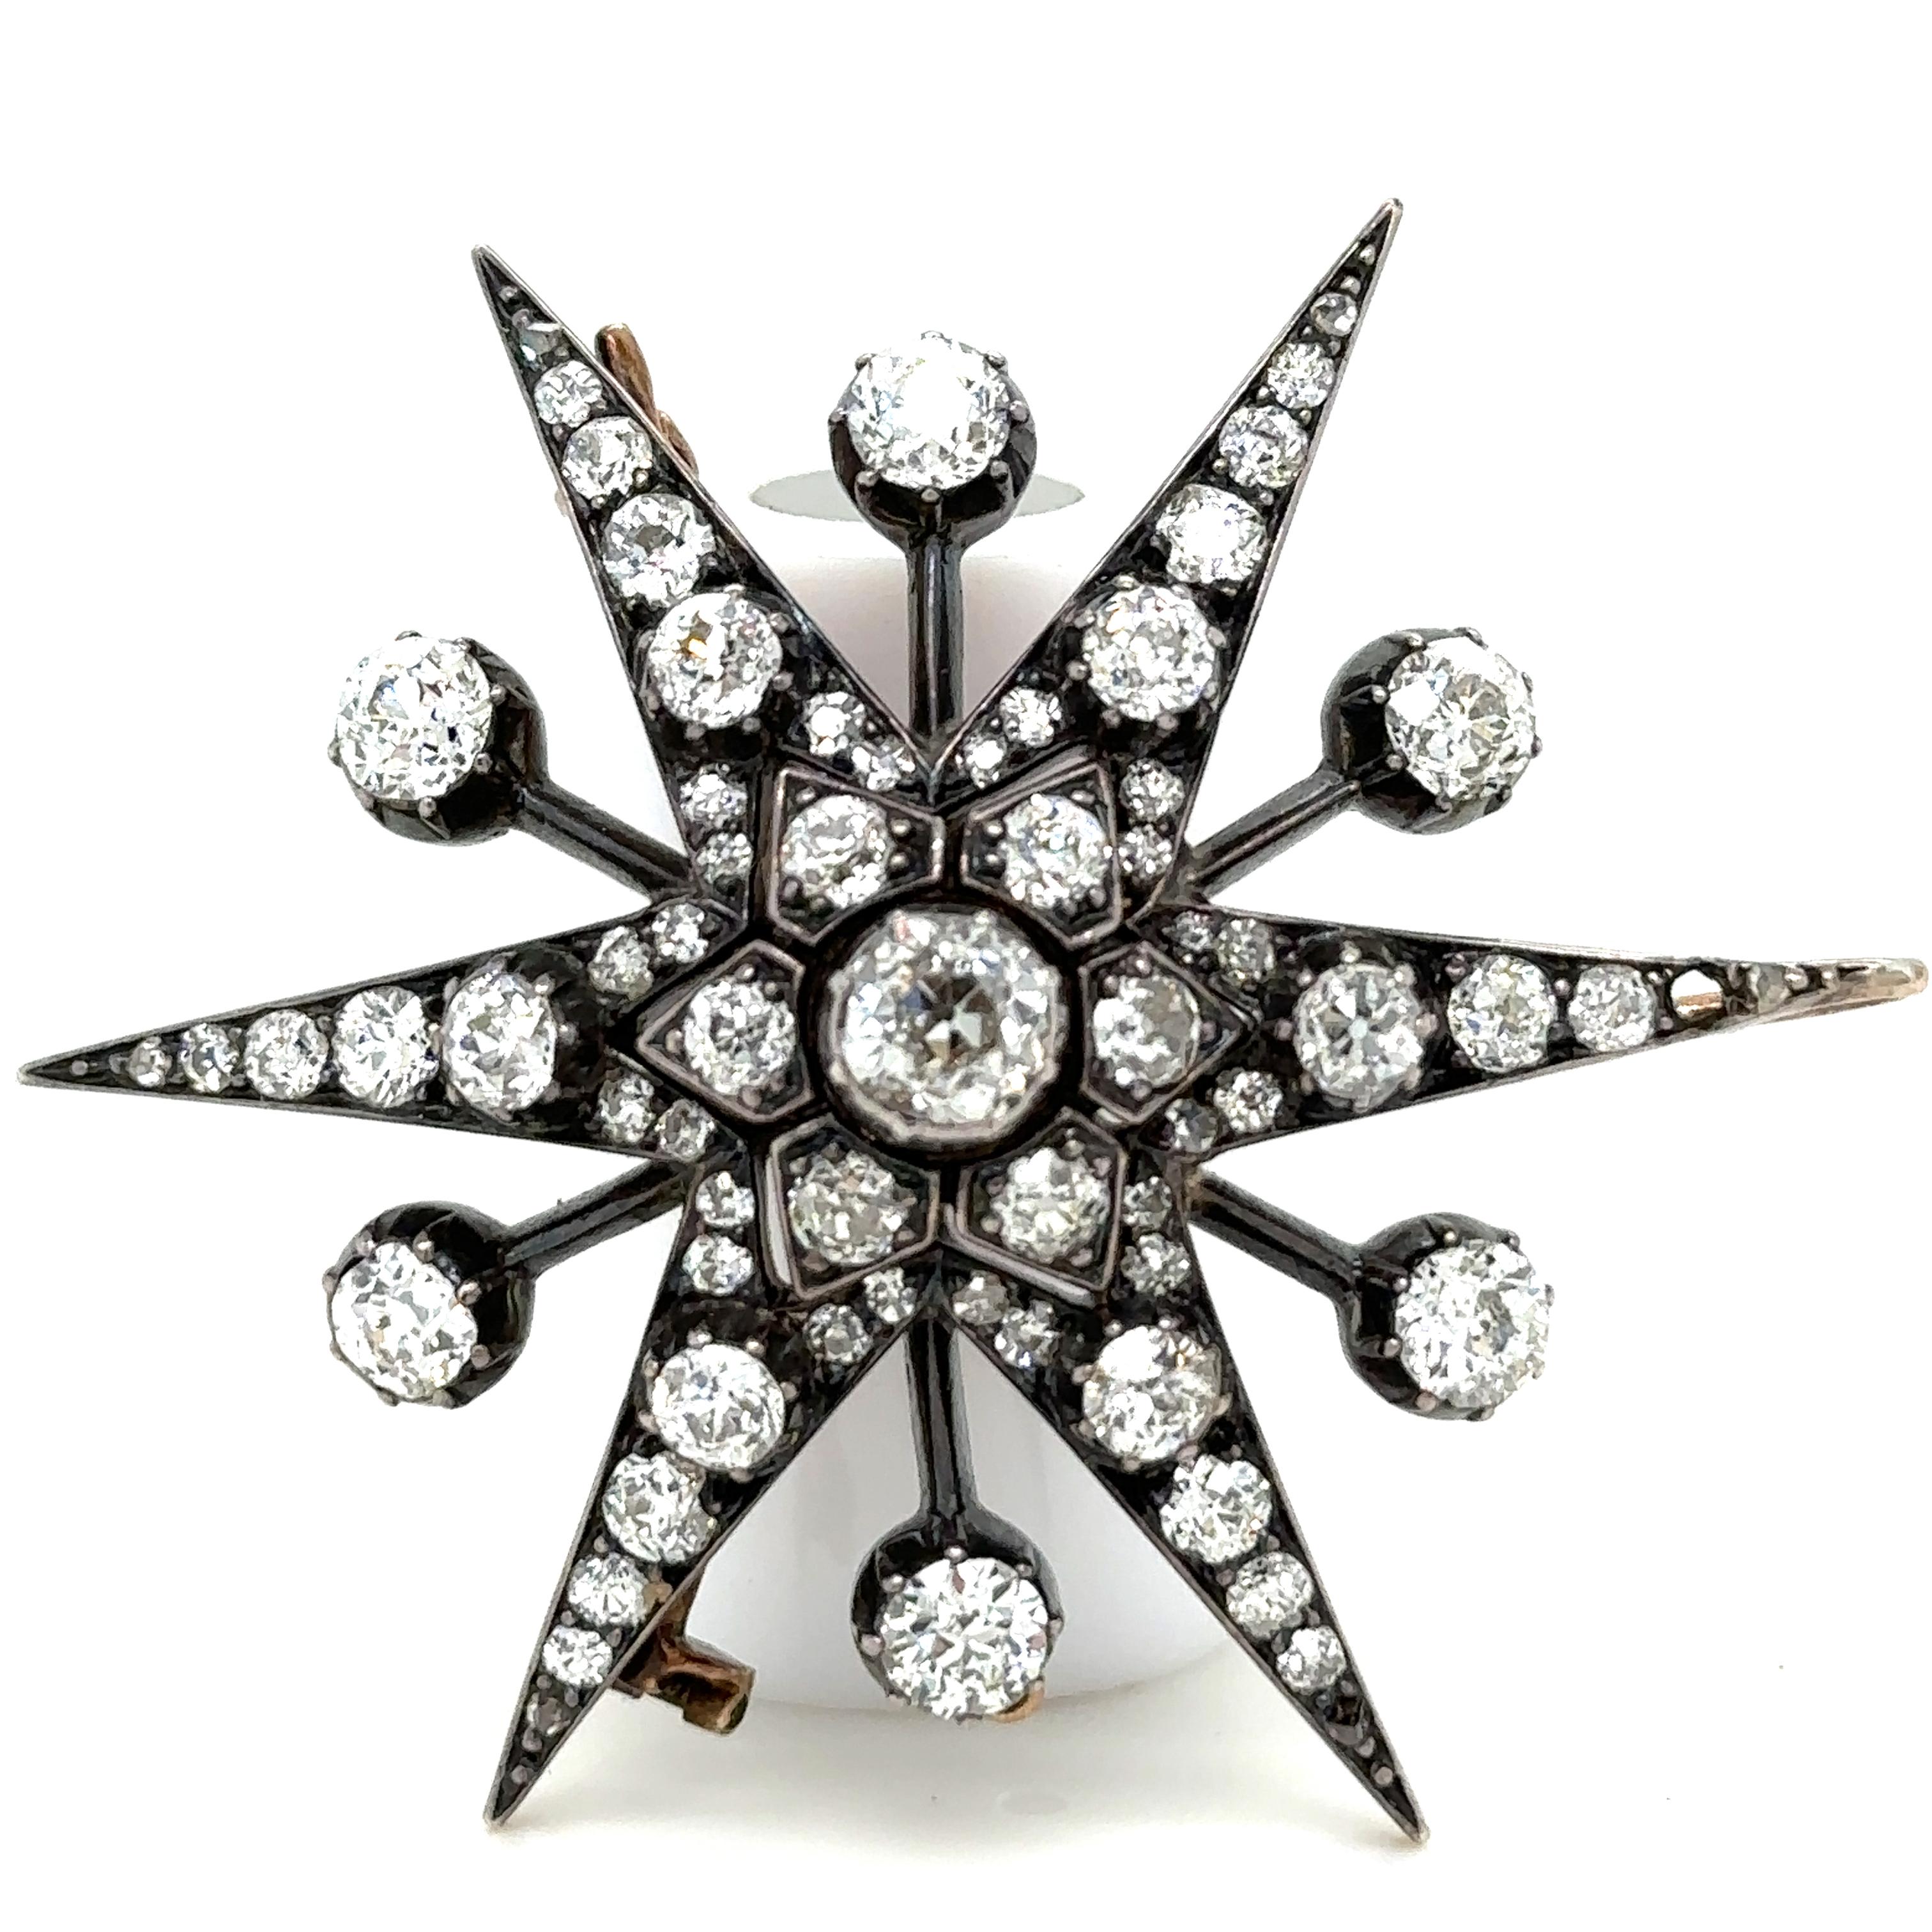 A Victorian Old Cut Diamond Starburst Pendant/Brooch, with 66 old cut diamonds pavé set in silver on 15ct yellow gold. 9ct gold pendant fitting.

Diamonds 1 = 1.00ct (estimated), Graded in setting as Colour: H to I, Clarity: VS

6 = 2.70ct